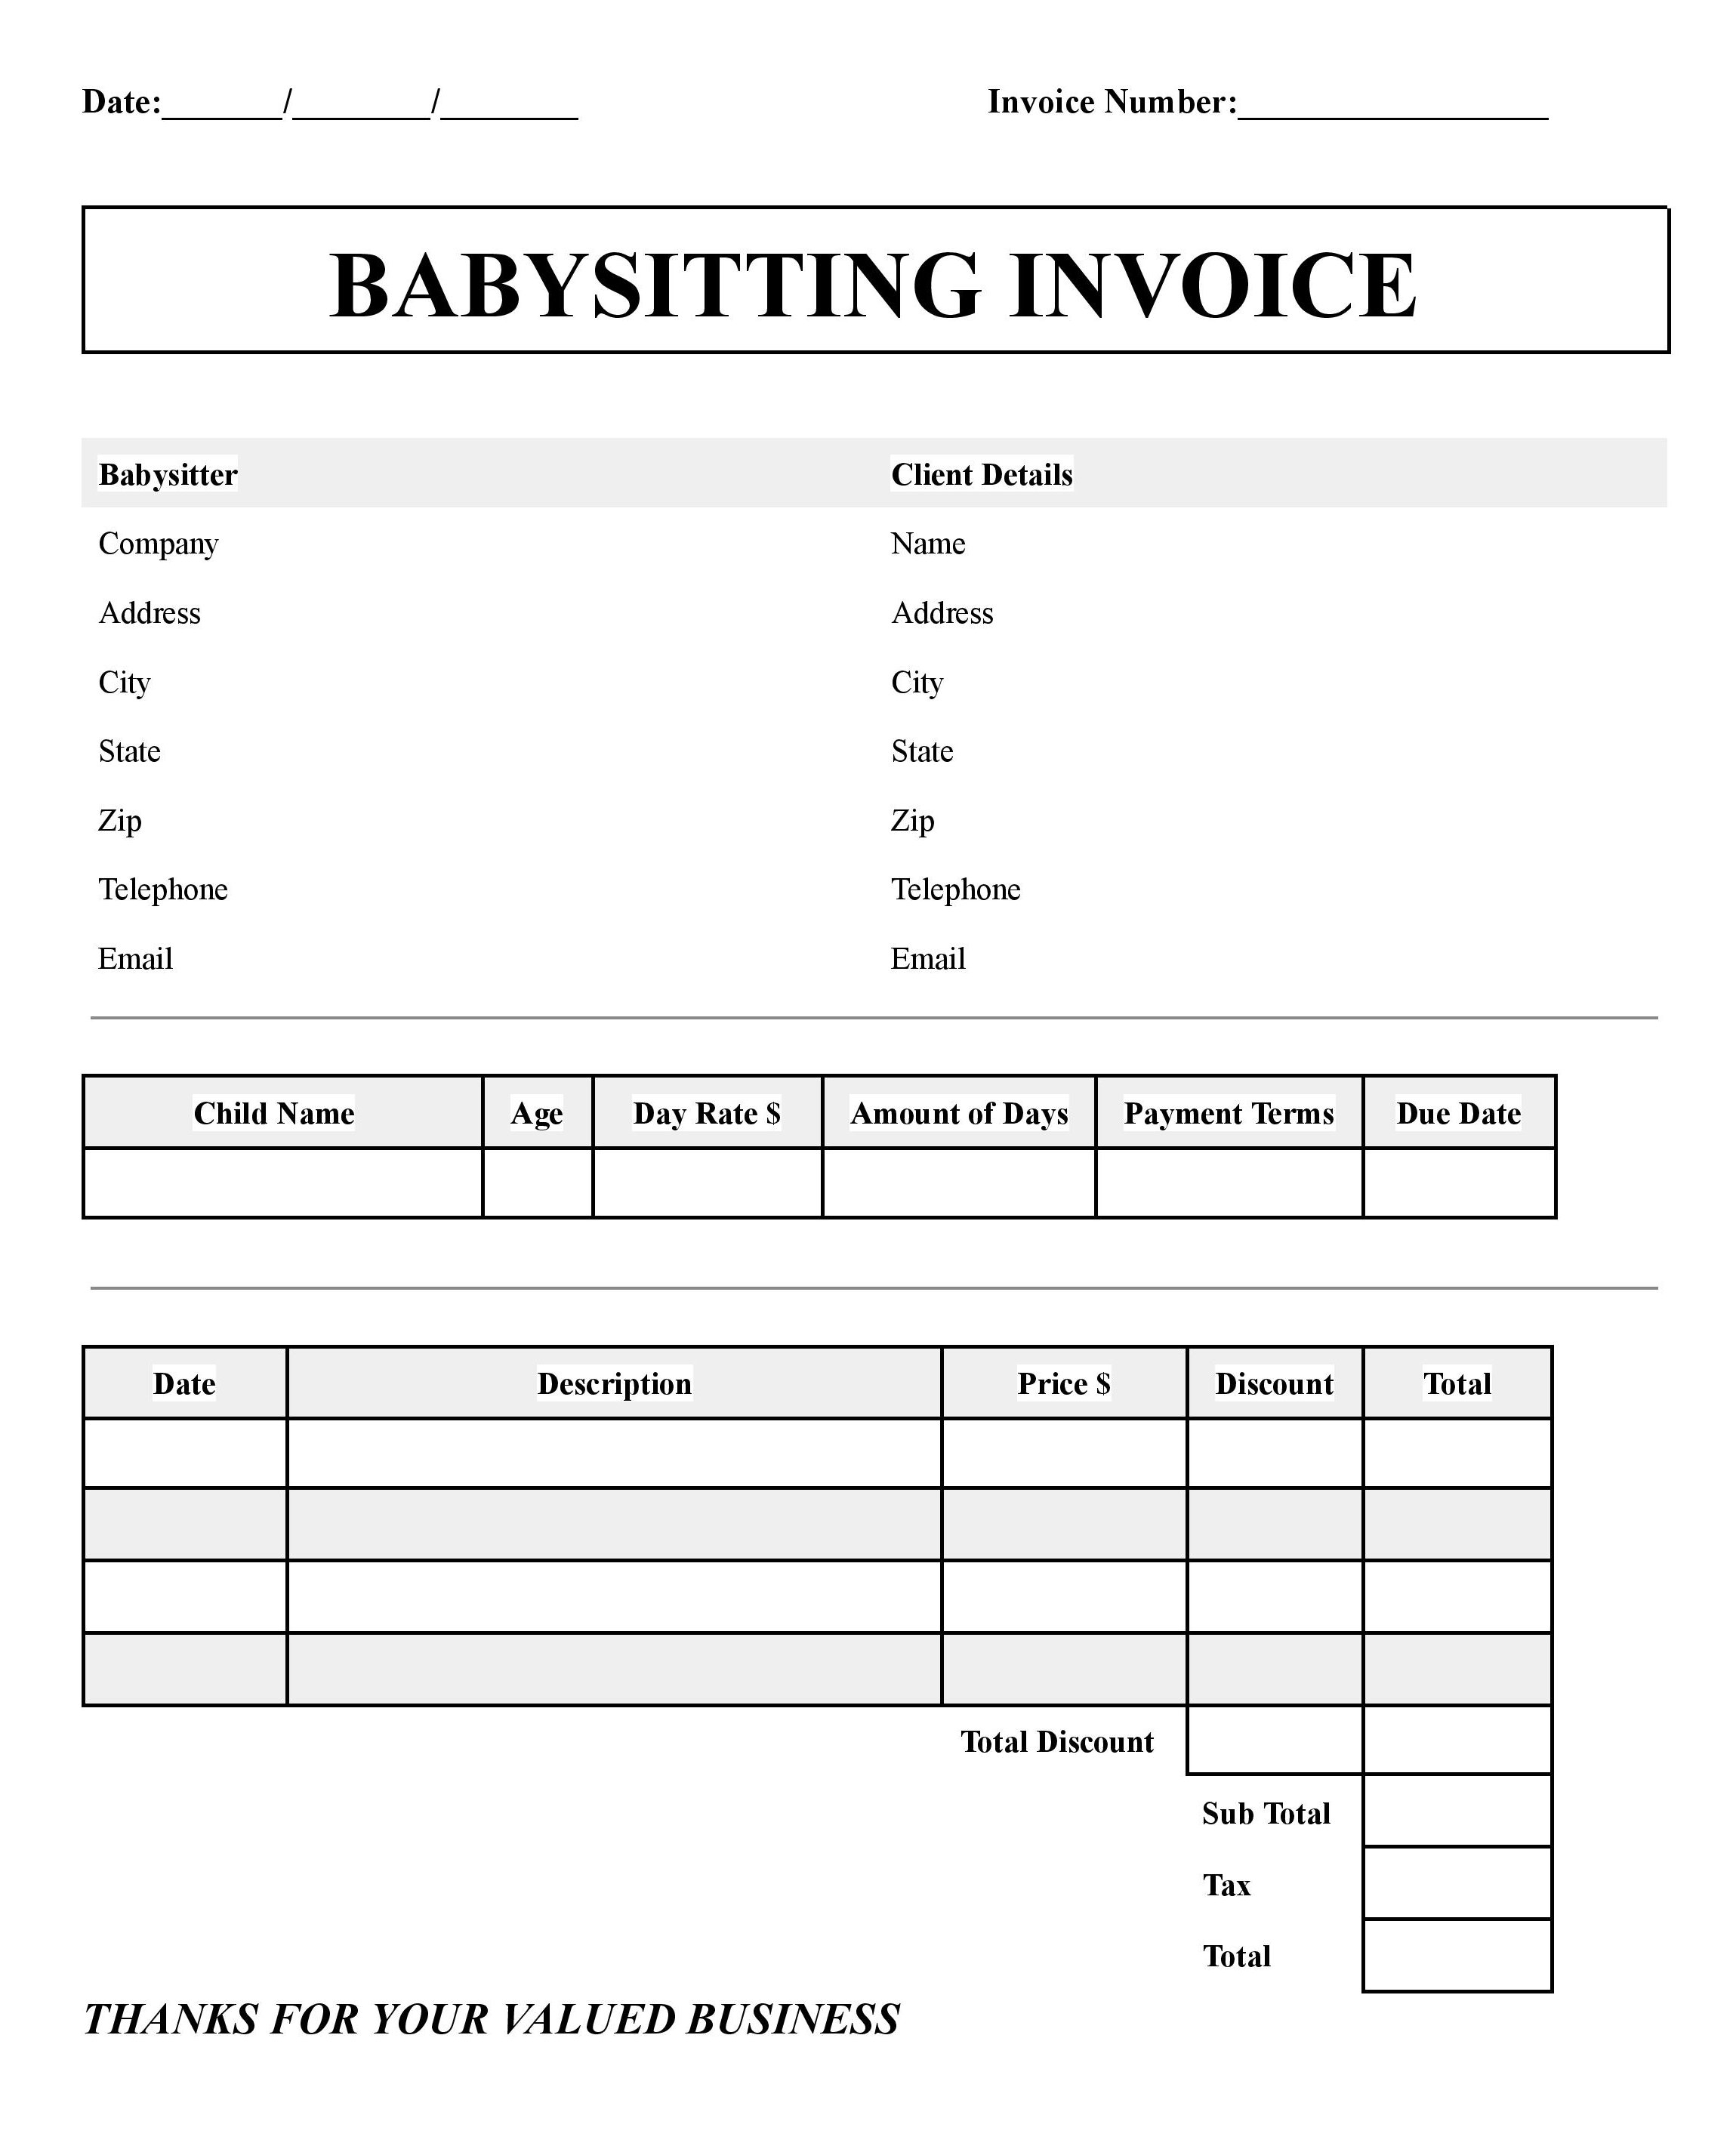 babysitting-invoice-template-daycare